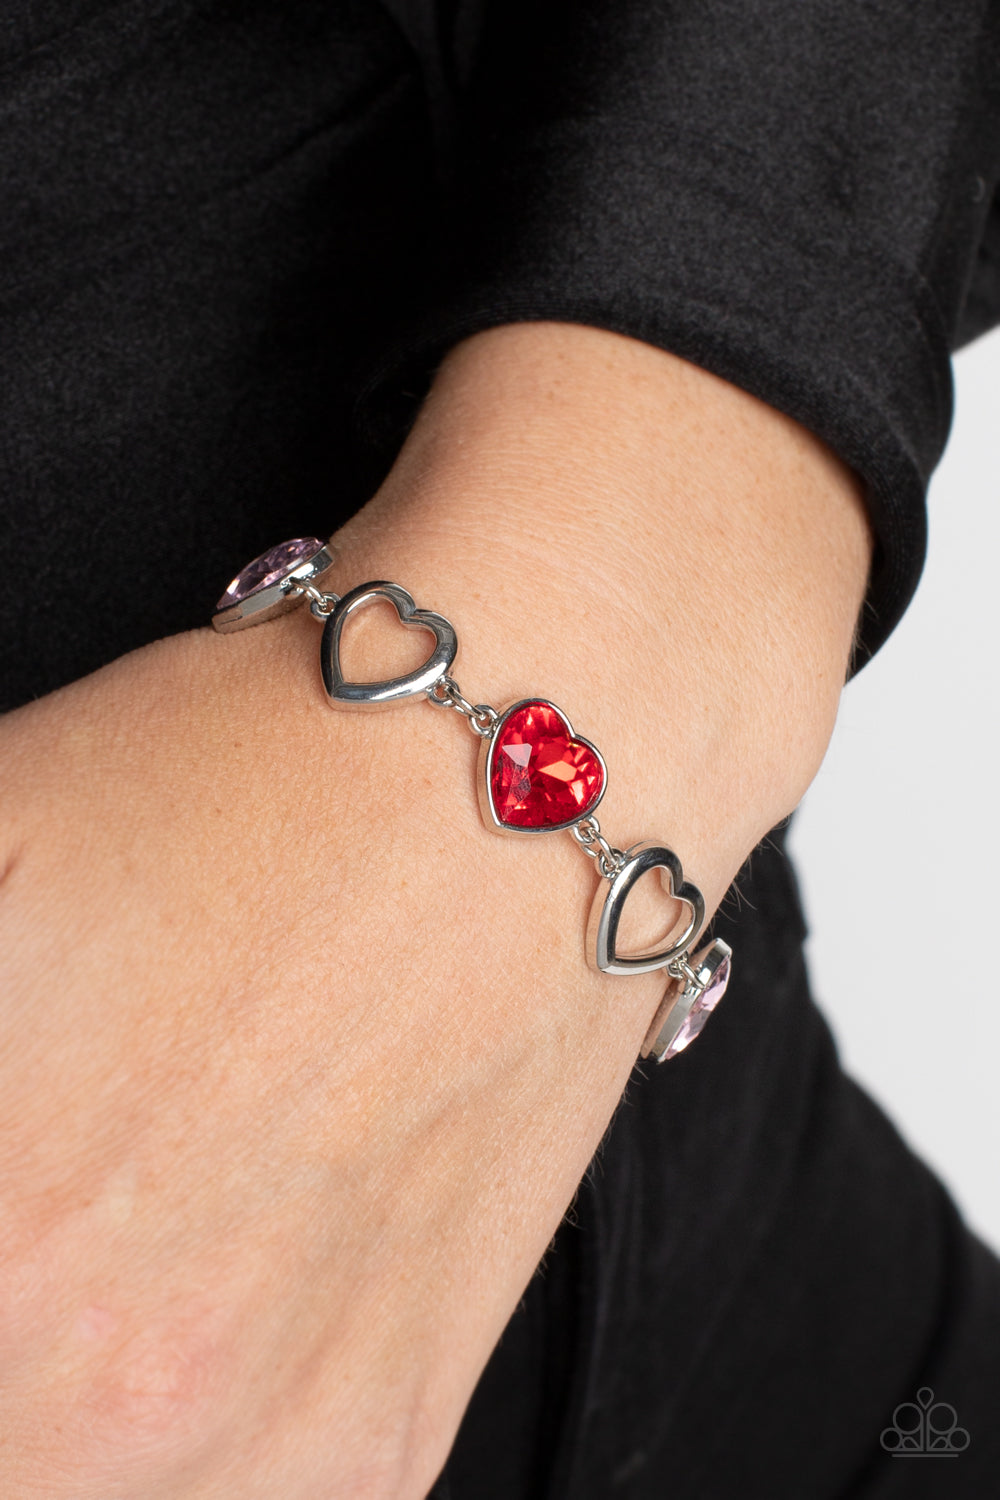 Paparazzi Accessories Sentimental Sweethearts - Multi Airy, sleek, silver heart silhouettes interchange with red and pink heart gems pressed into silver frames for a romantic statement around the wrist. Features an adjustable clasp closure. Sold as one in